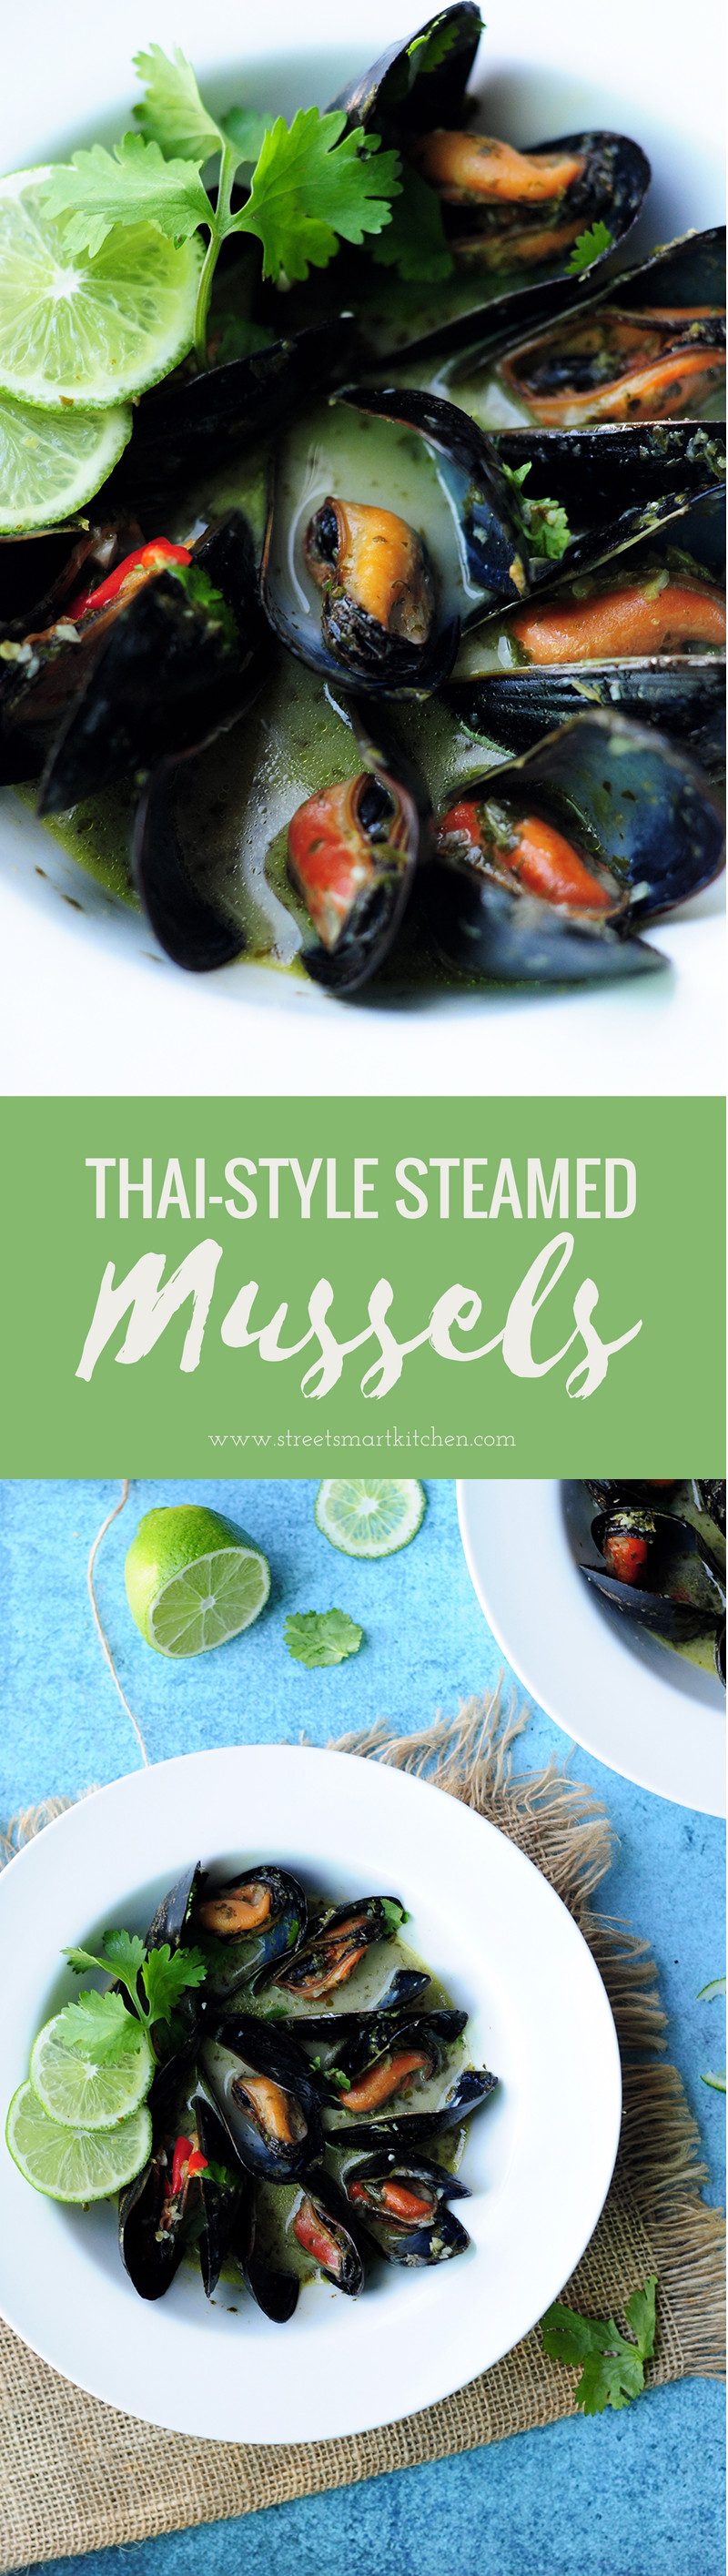 Quick and delicious mussels steamed in white wine along with a spicy and creamy Thai-style cooking sauce.